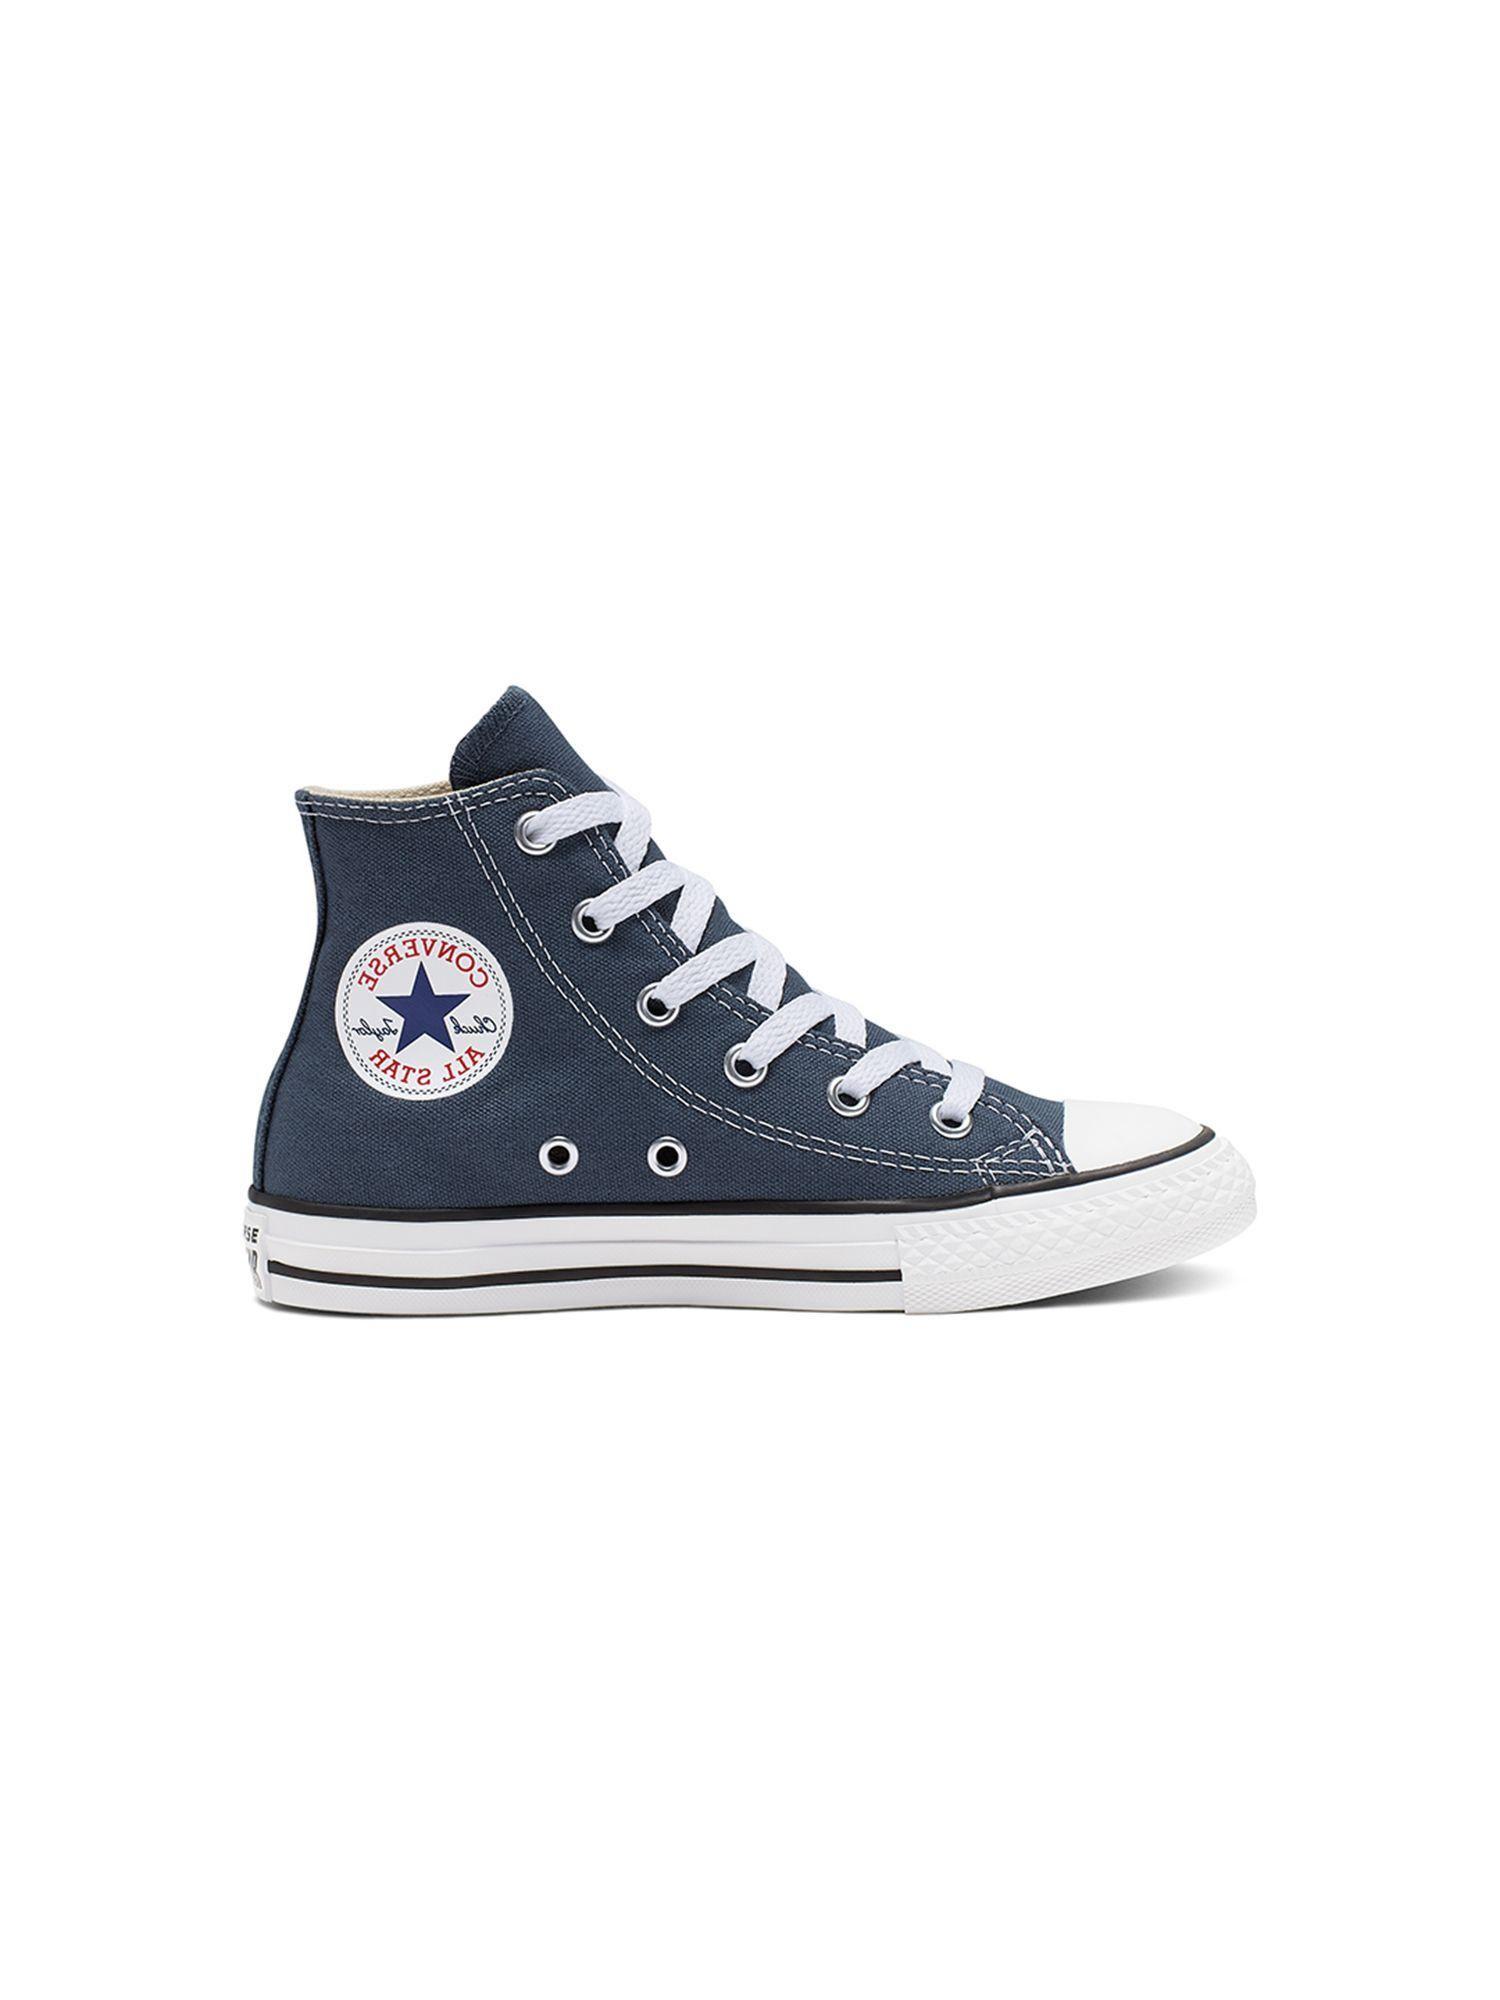 kids-chuck-taylor-all-star-sneakers